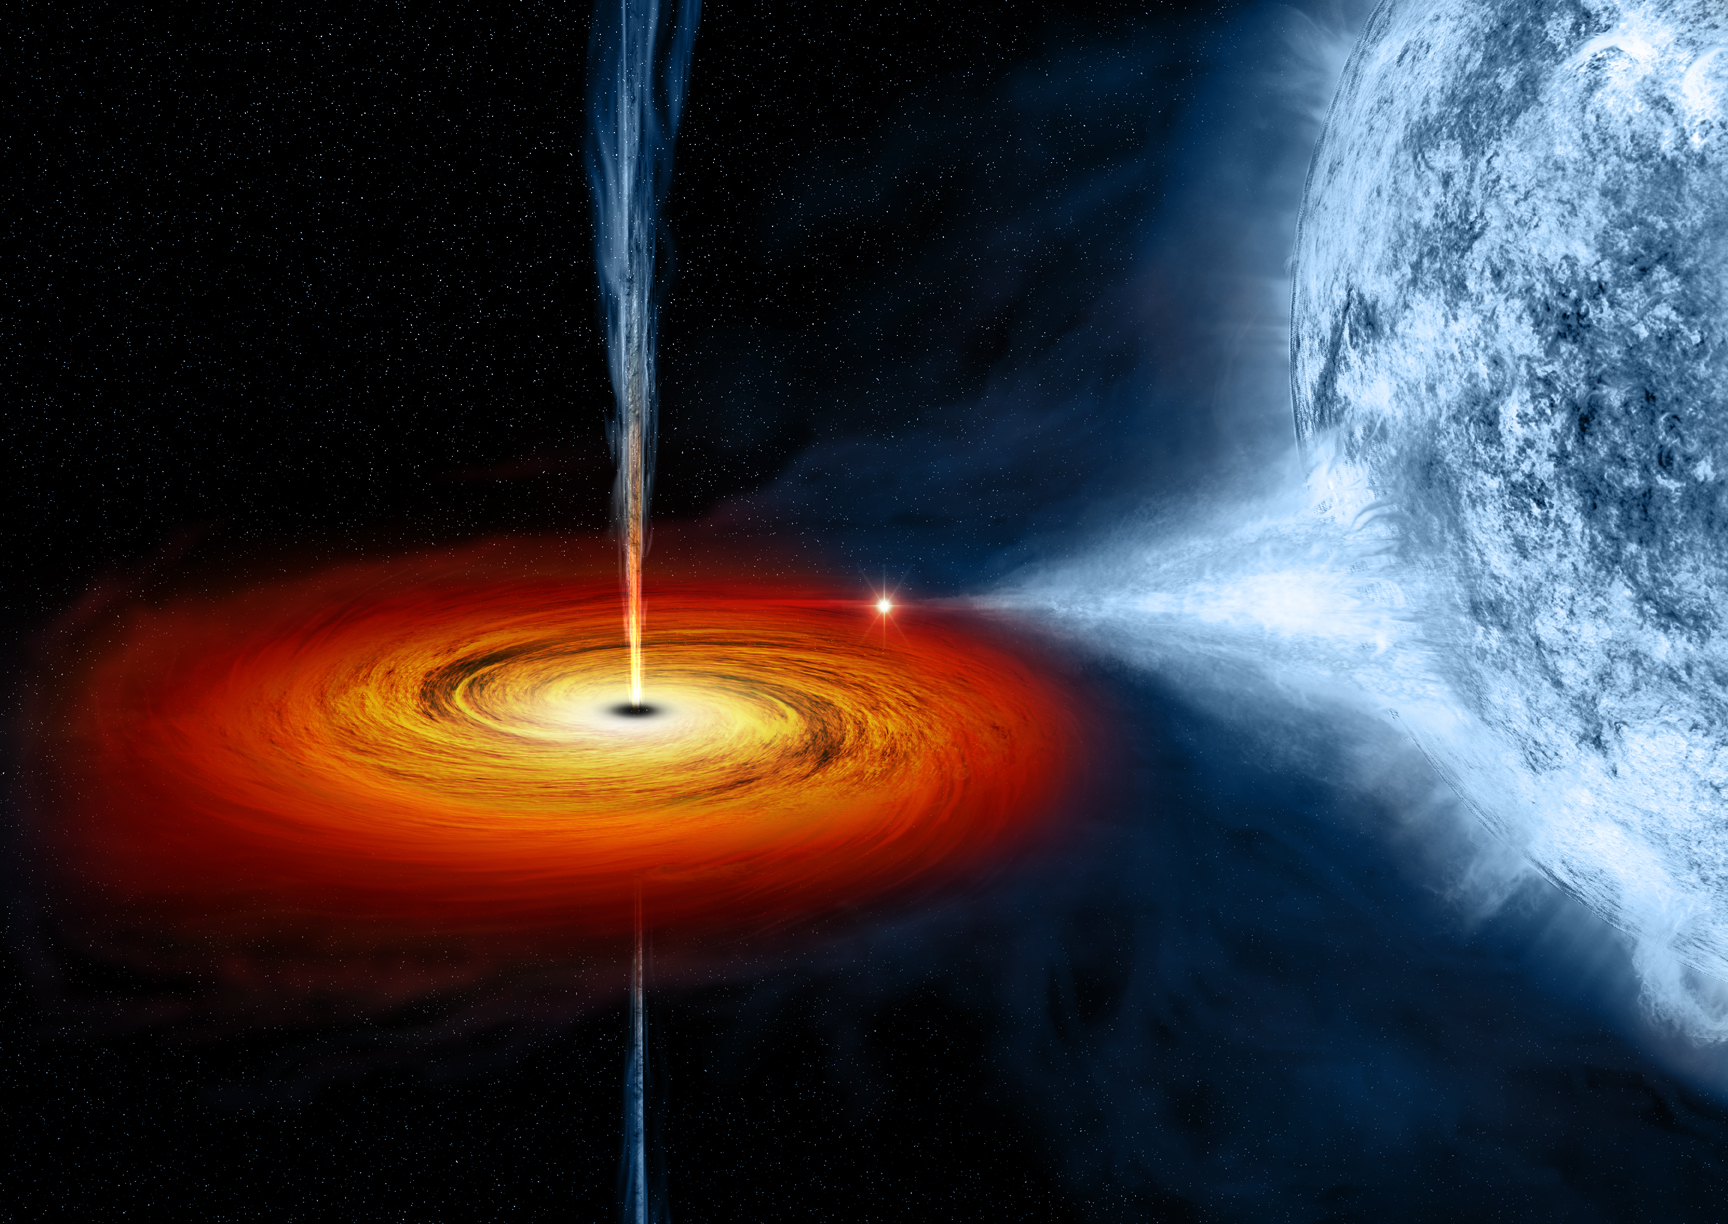 Black hole with spinning material around it